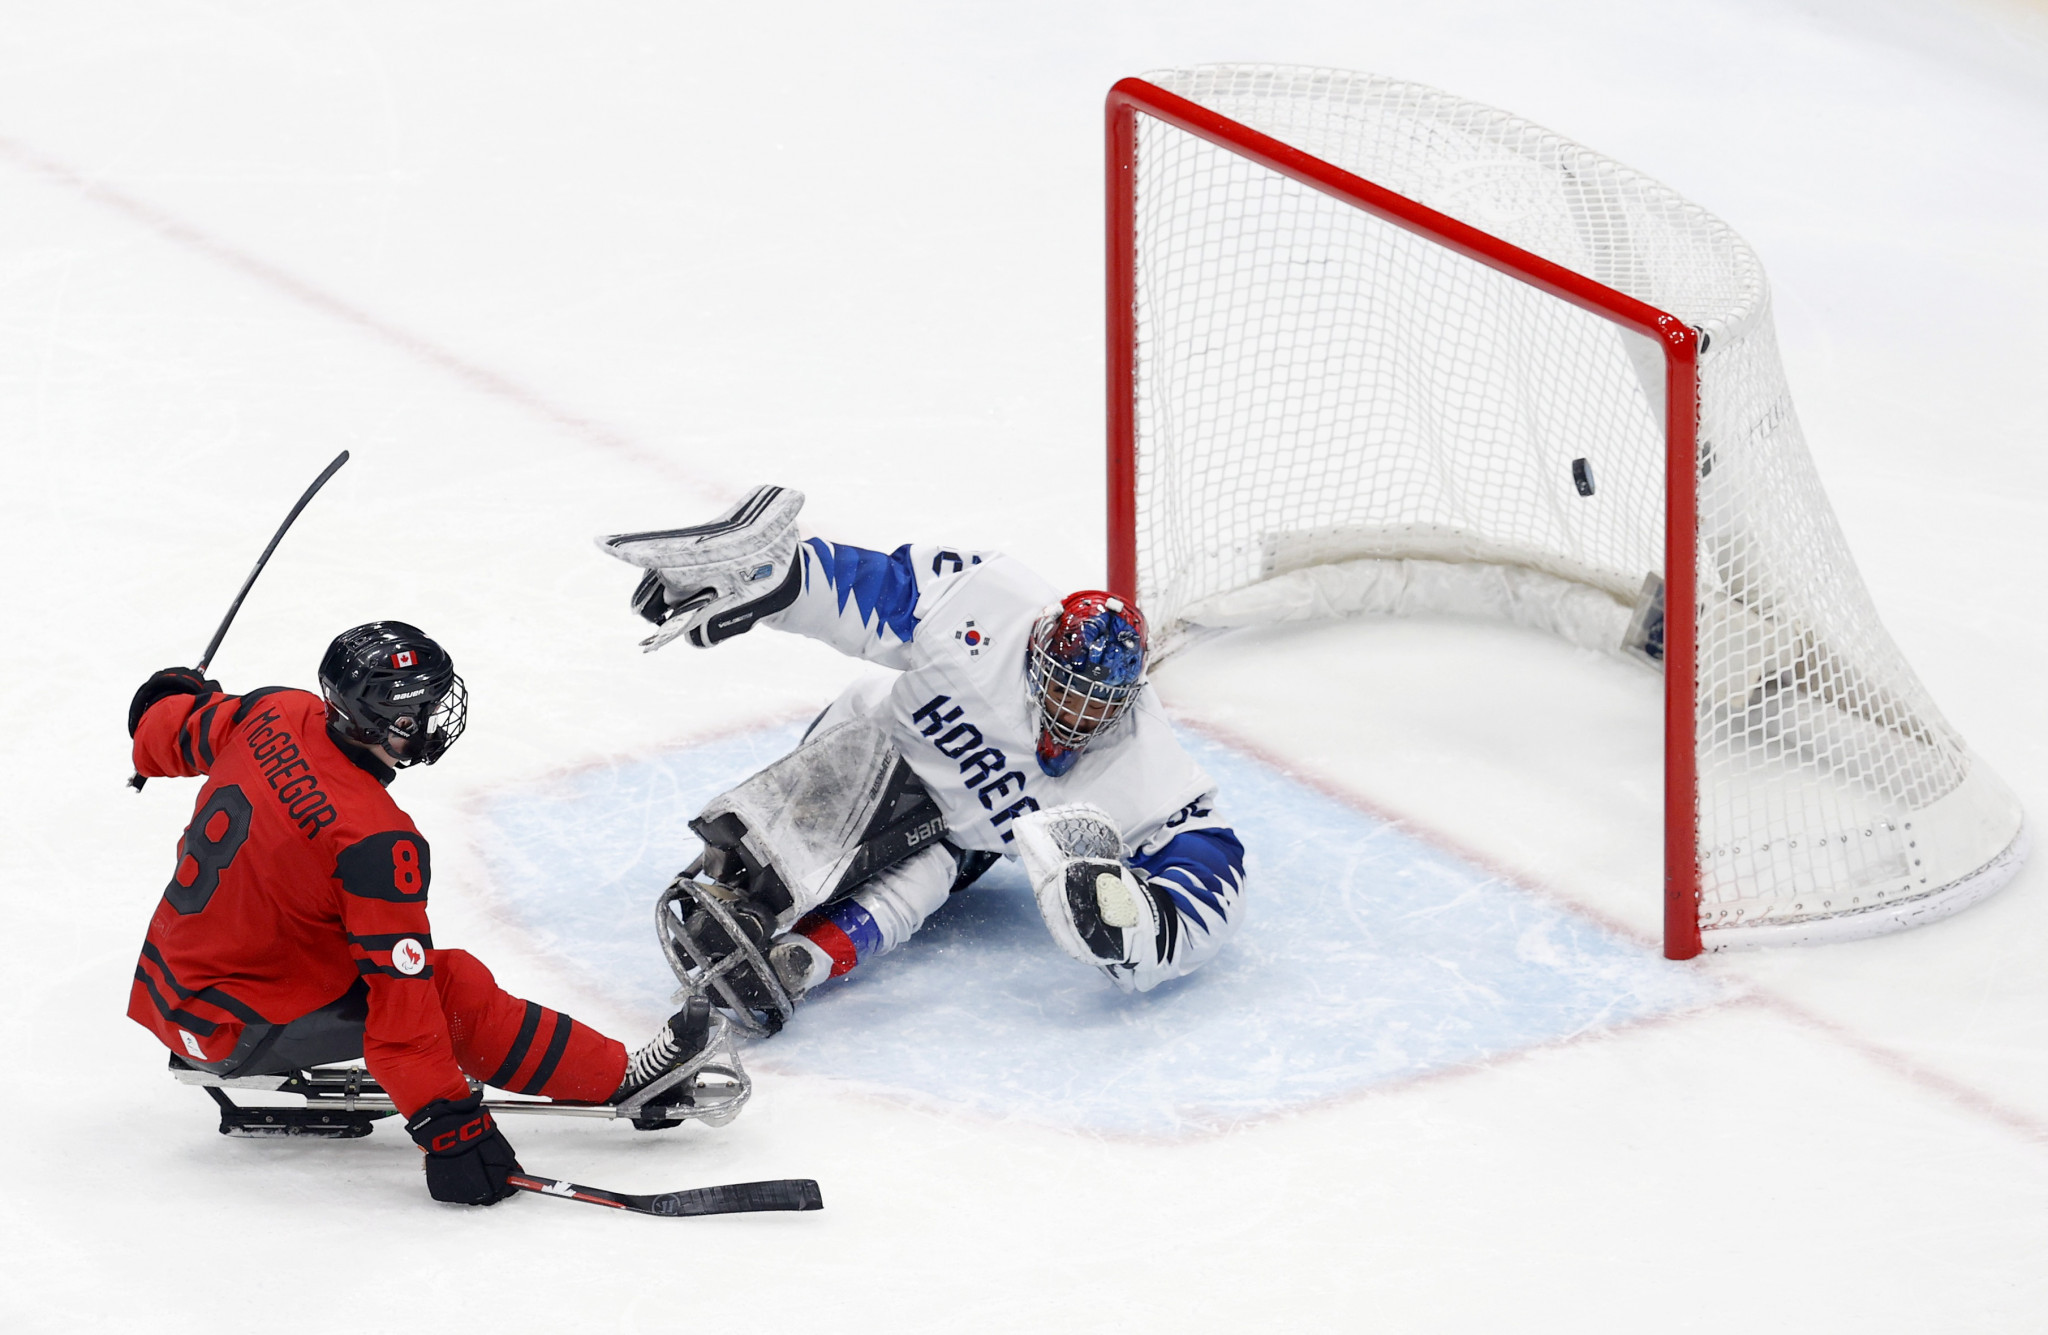 Tyler McGregor scores one of his four goals as Canada thump South Korea 11-0 ©Getty Images